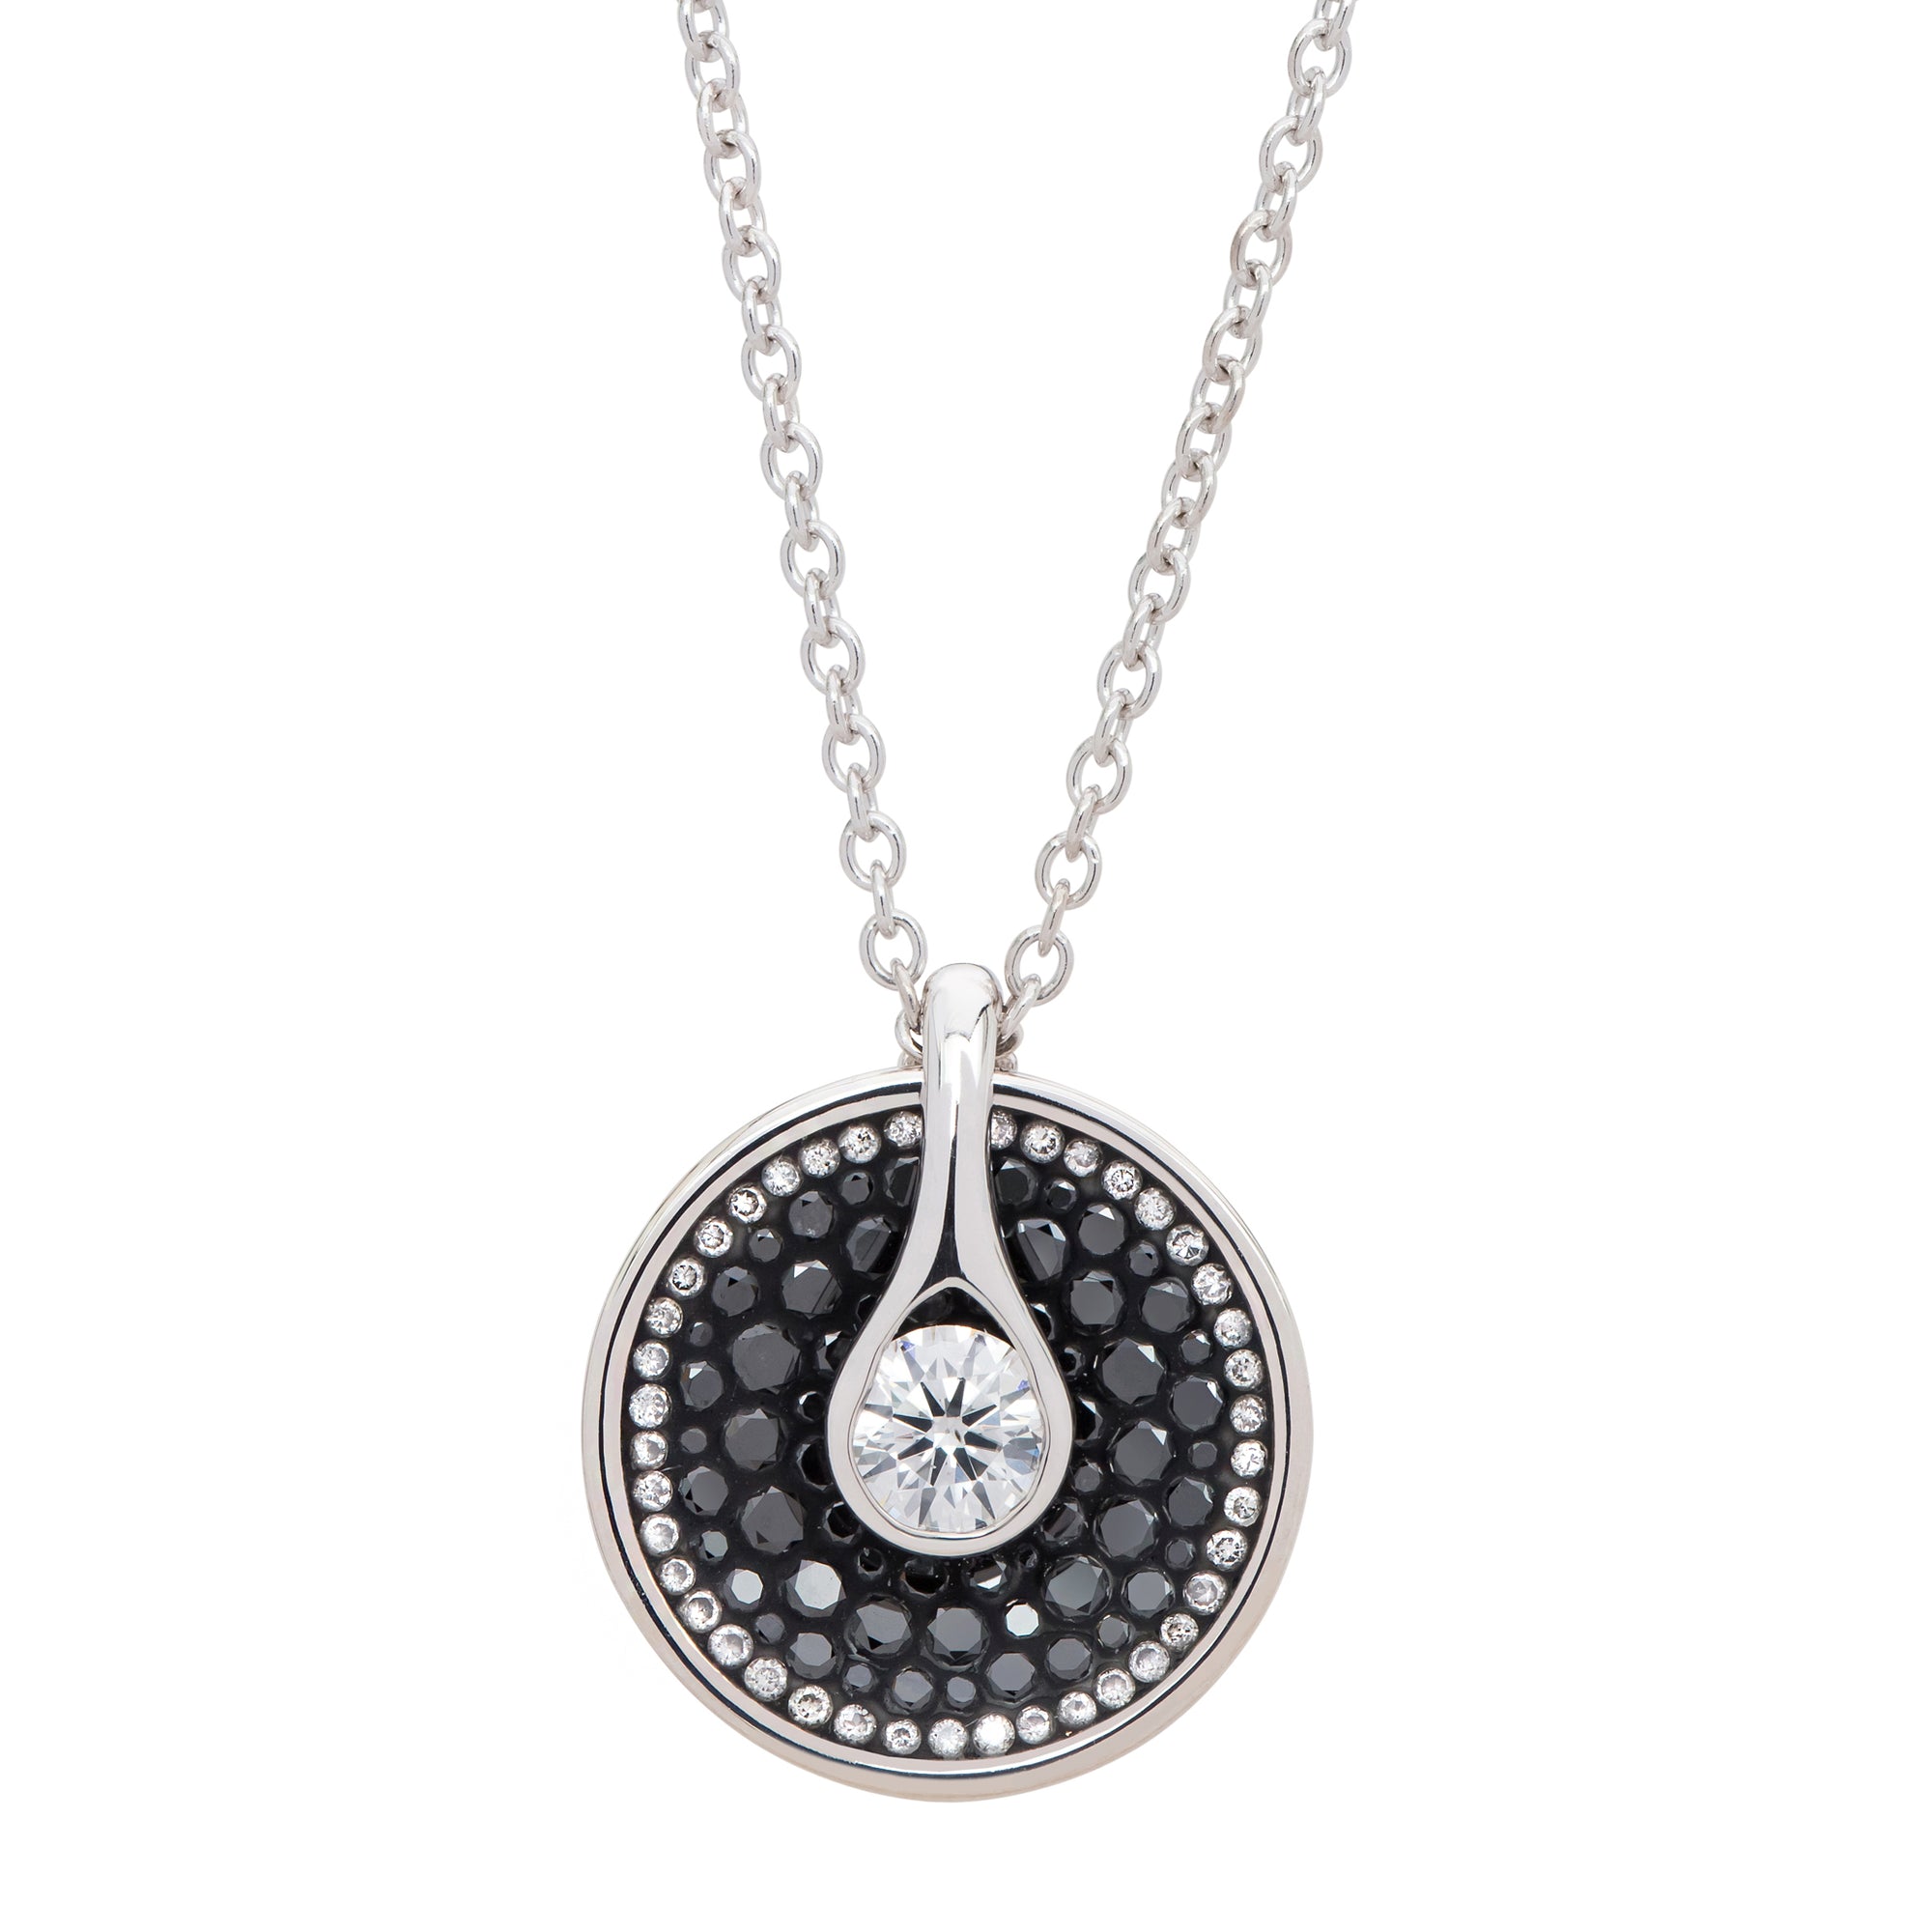 Border Black Opus Diamond Pendant Necklace by Pleve available at Talisman Collection Fine Jewelers in El Dorado Hills, CA and online. Specs: .90 cttw white & color enhanced diamonds, 18k white gold, 12mm diamond bale.